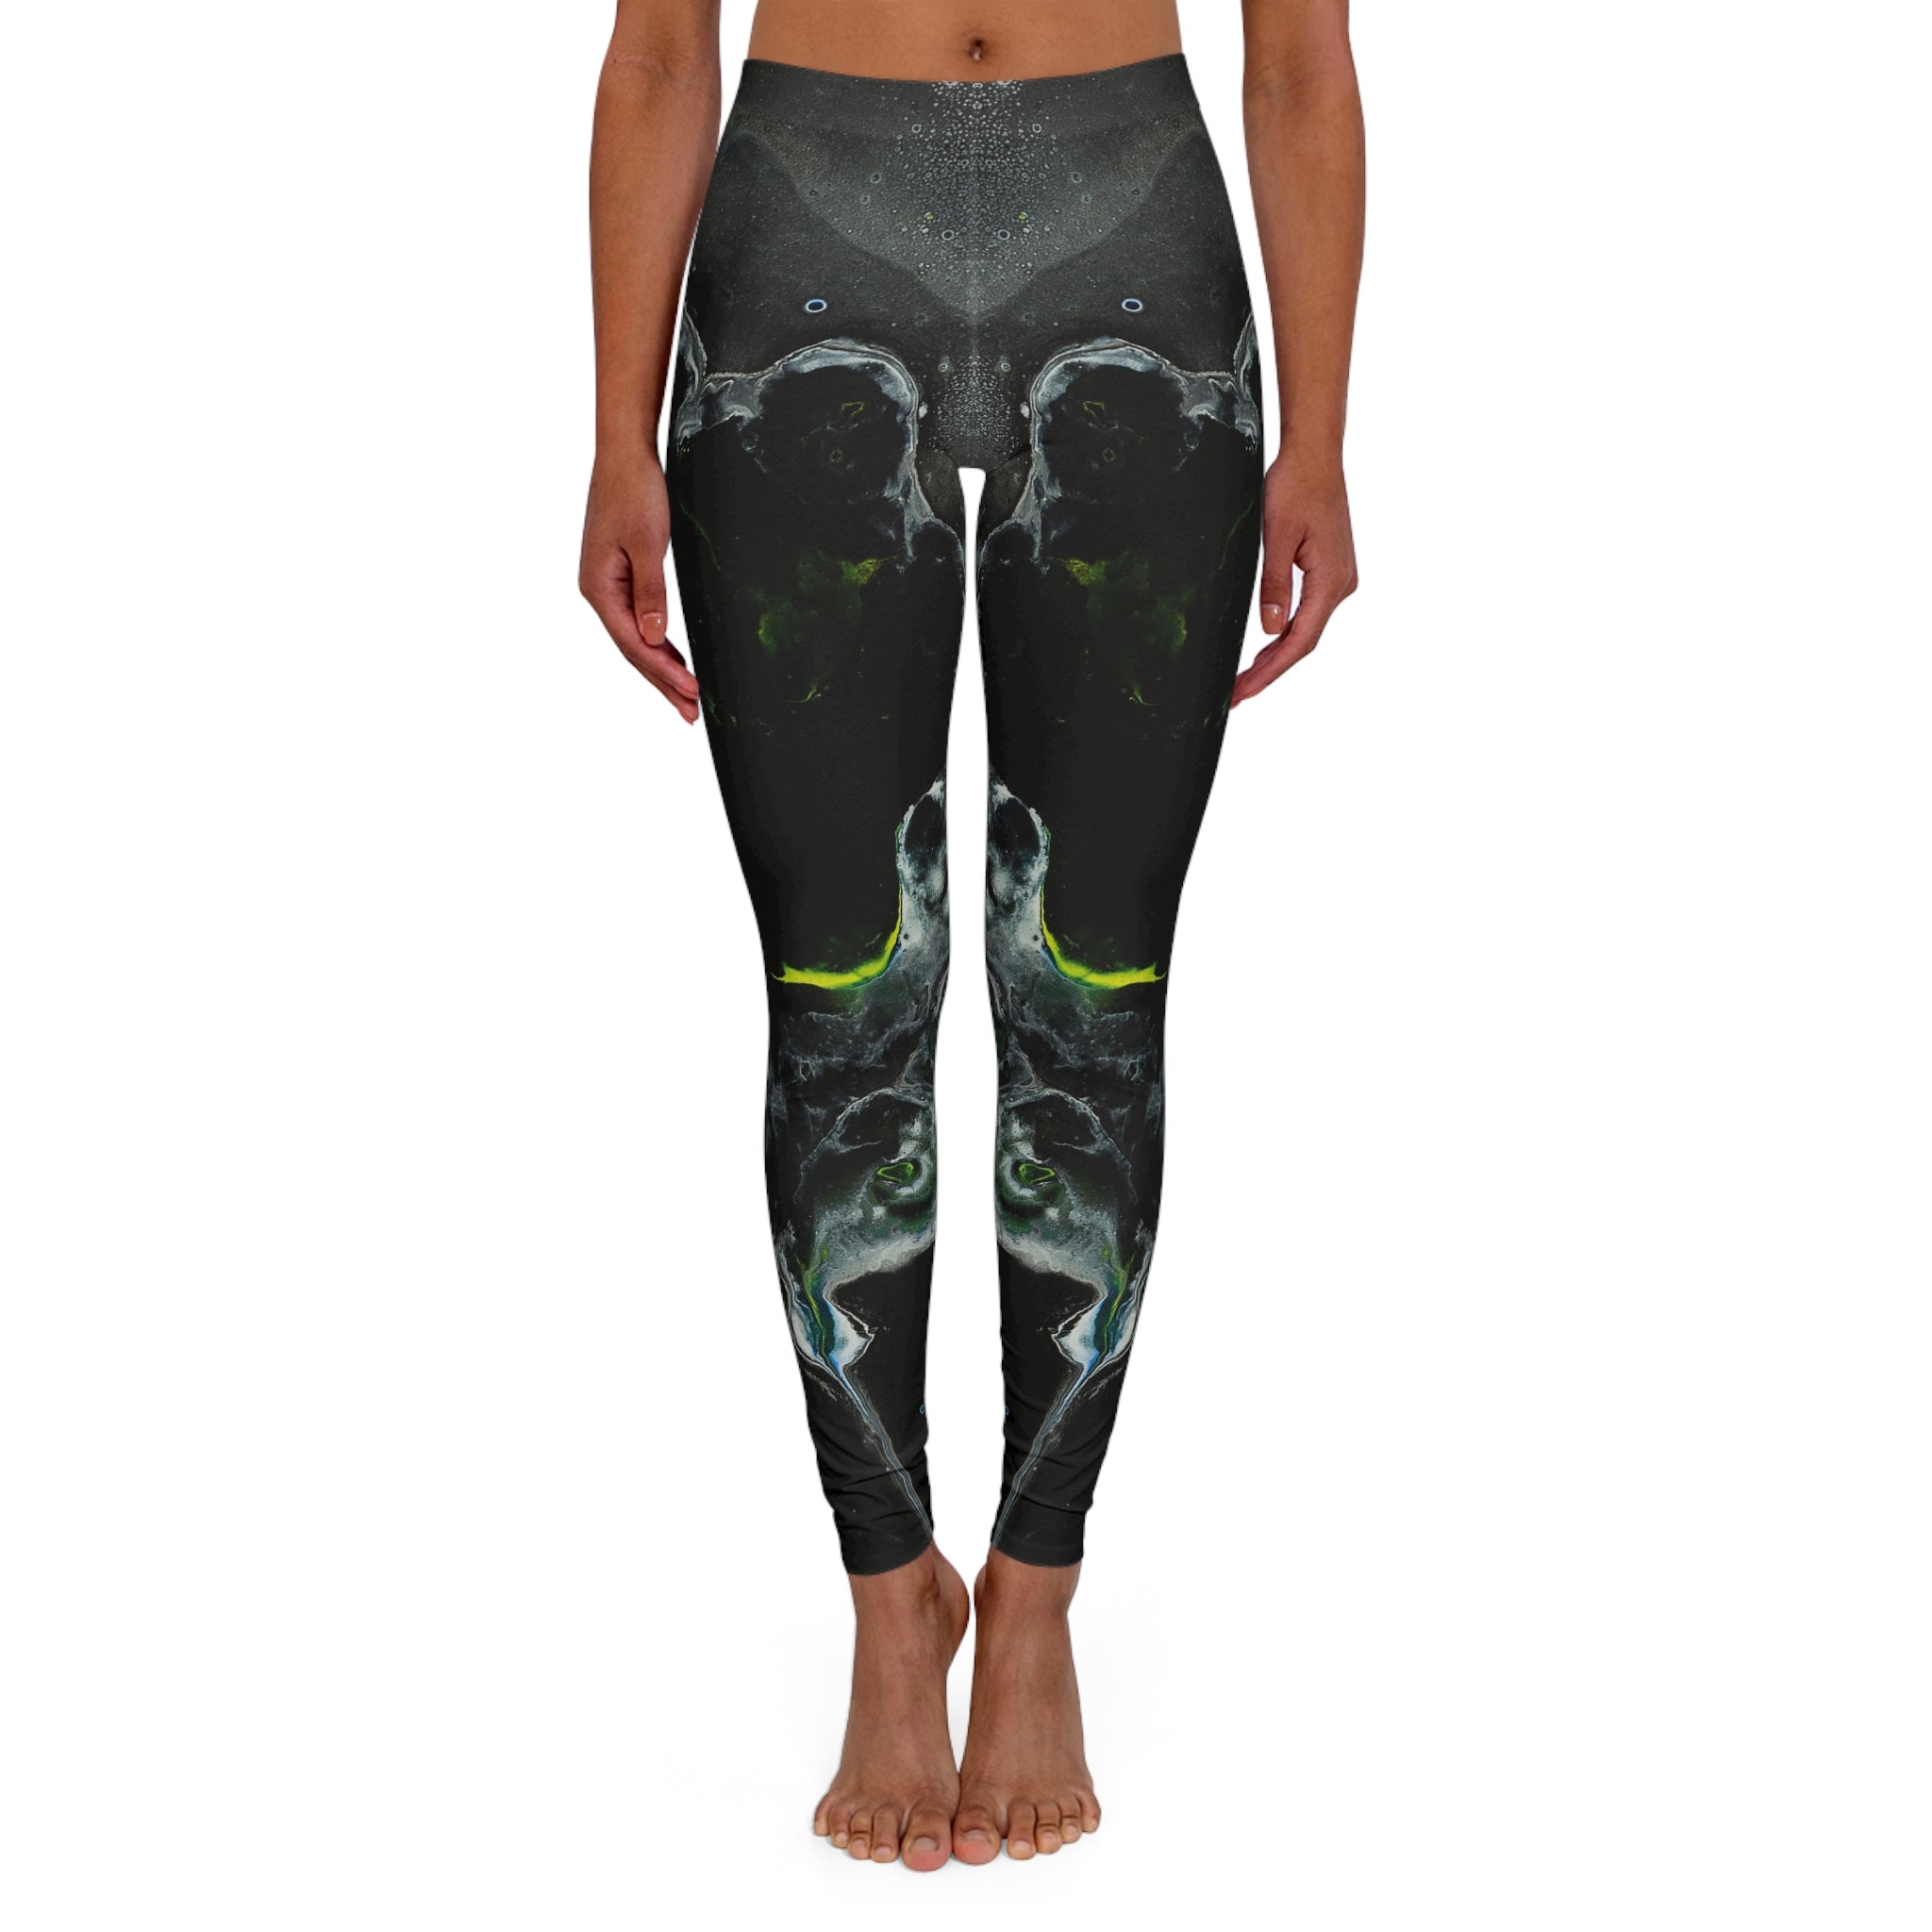 Women's Spandex Leggings - Disruption In Time - Front